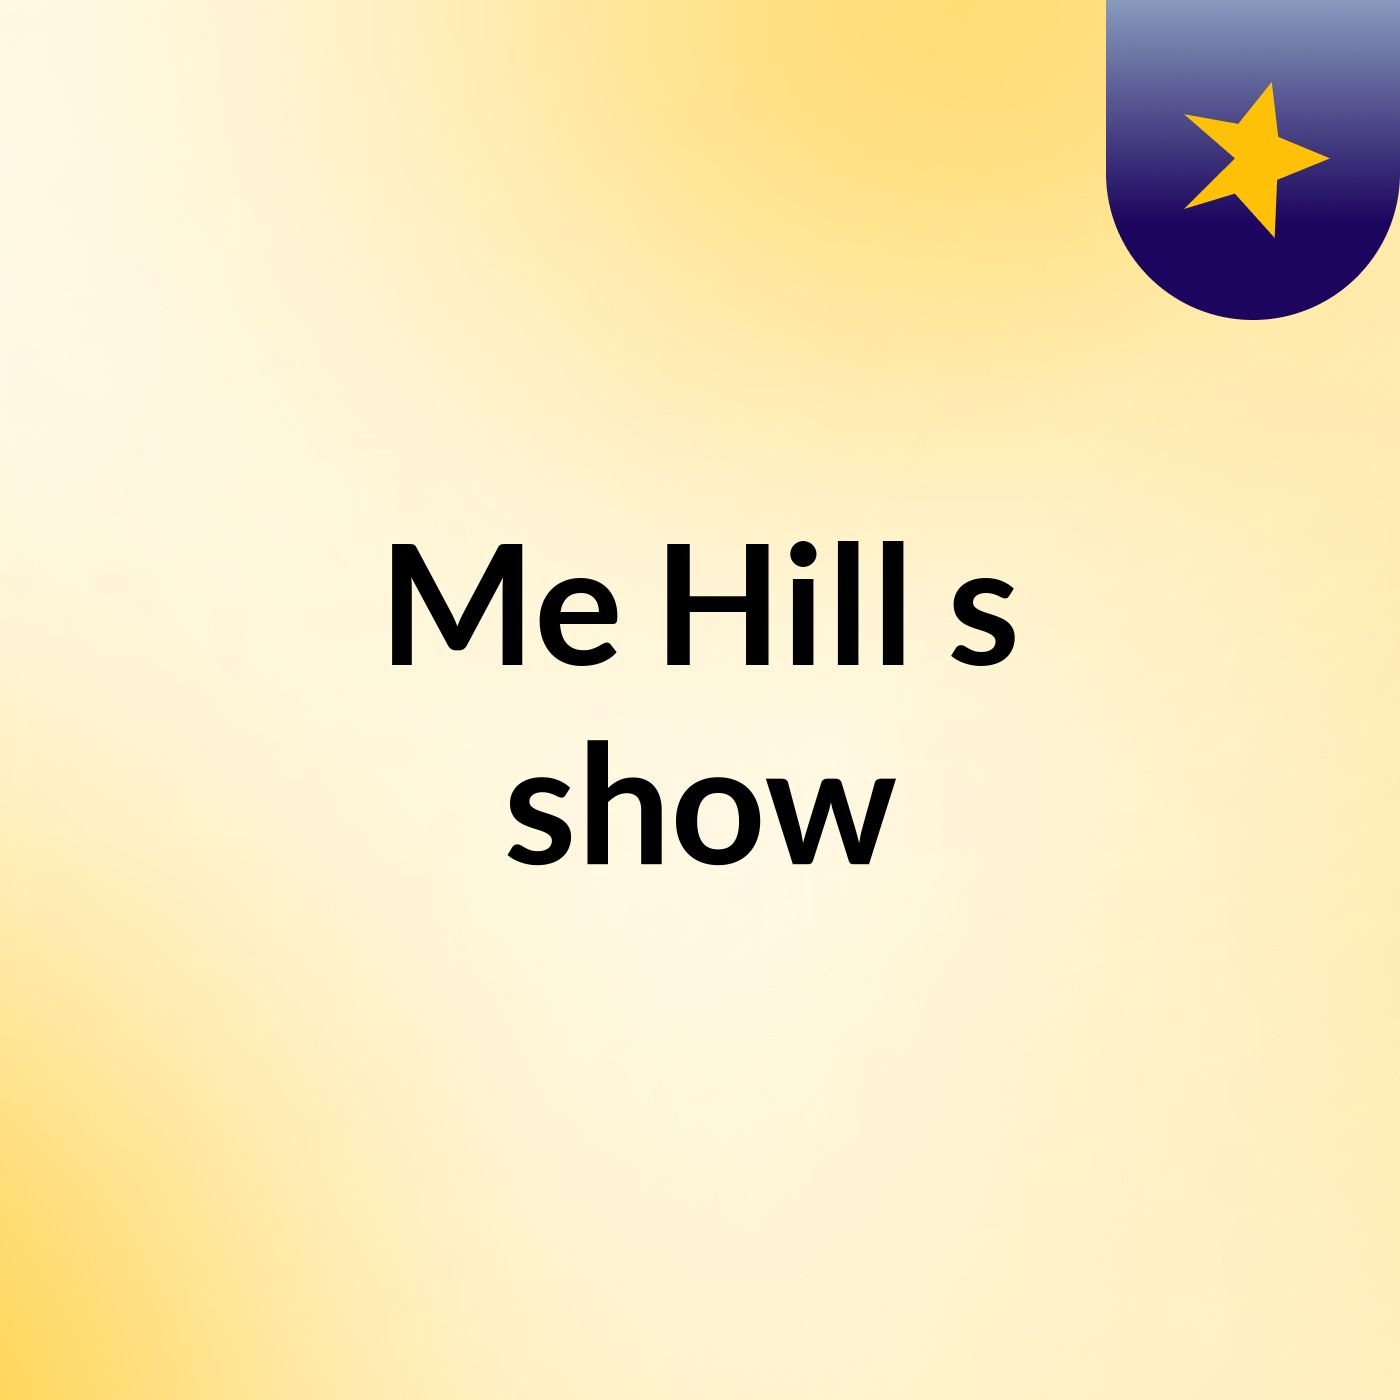 Me Hill's show